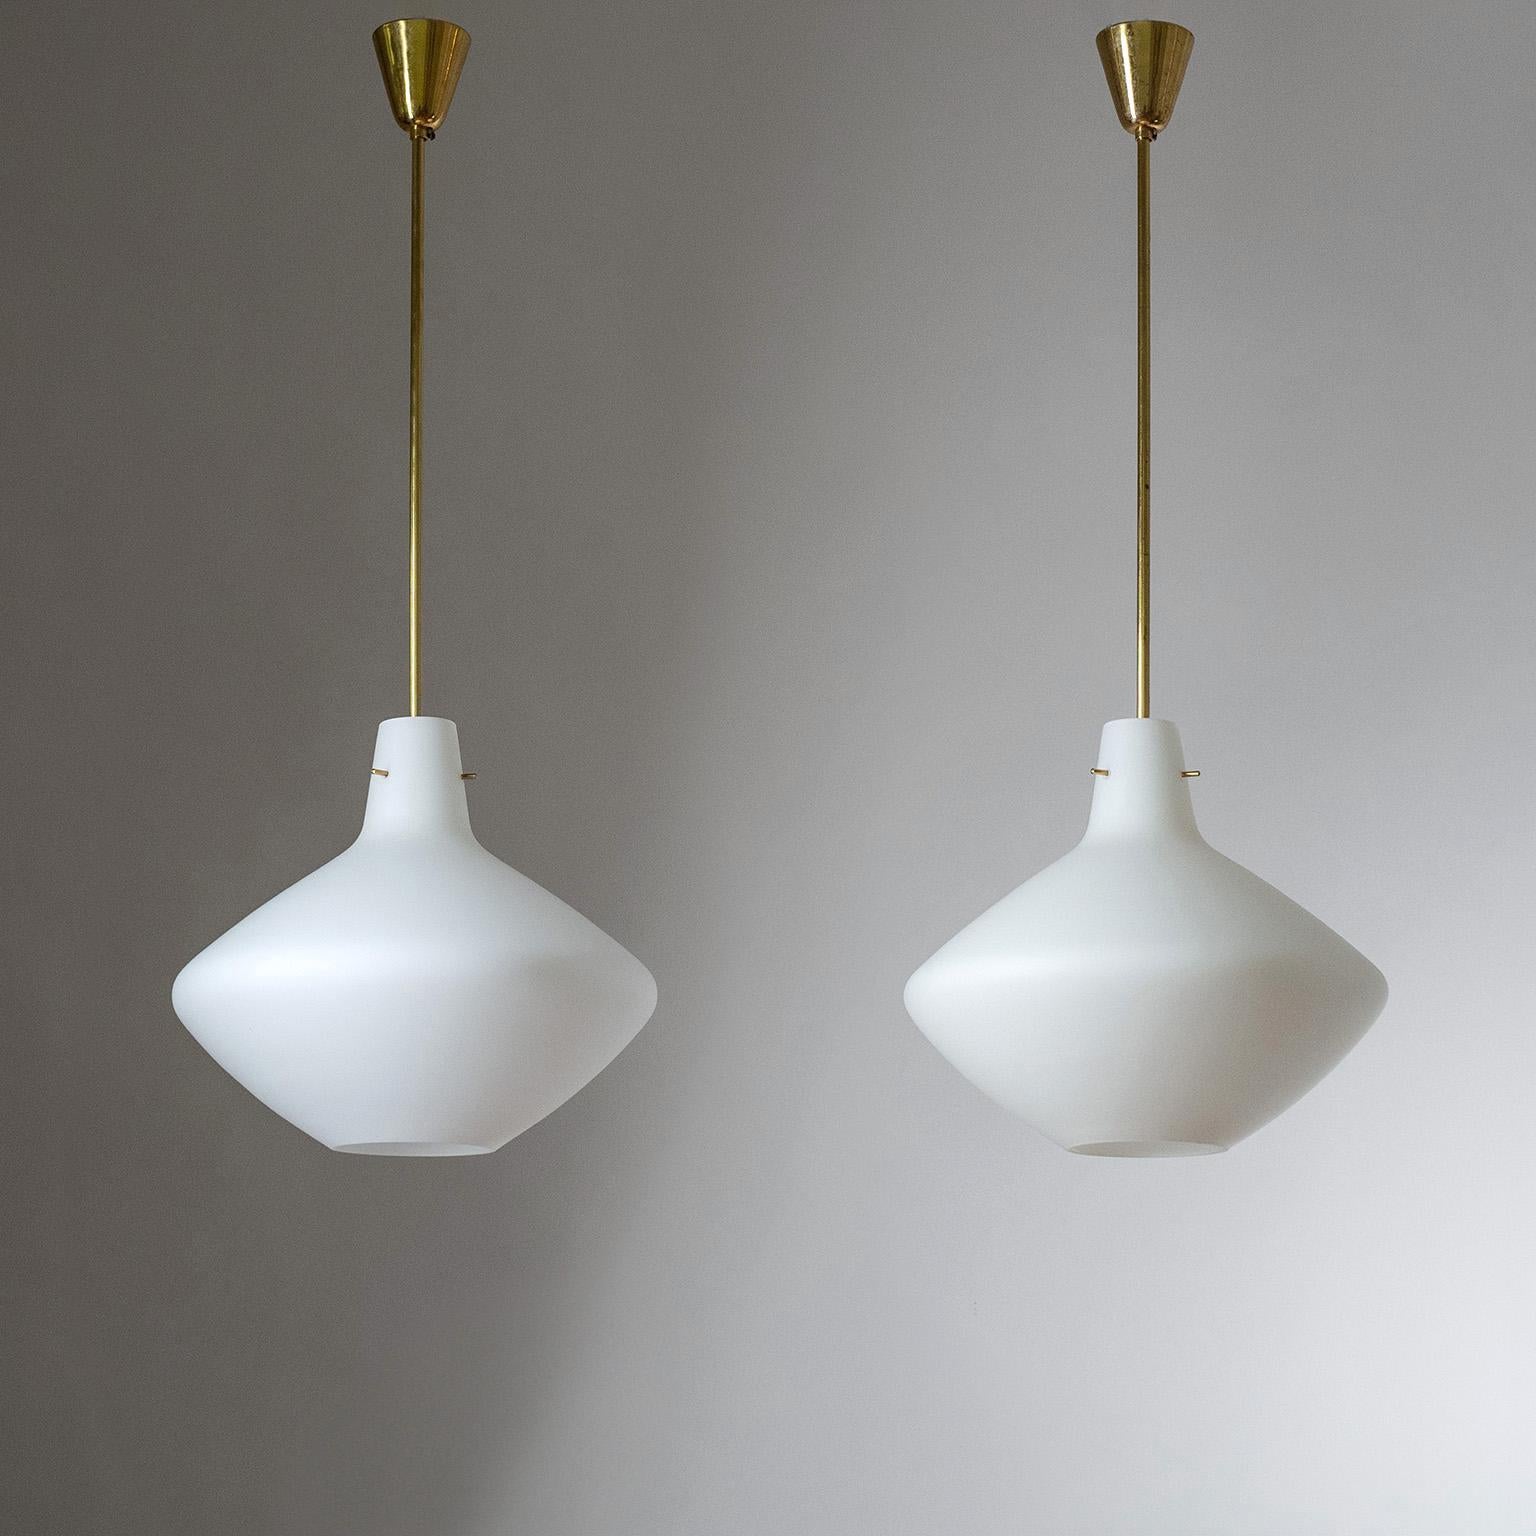 Pair of Italian satin glass pendants from the 1950s. Large blown 'triplex opal' glass diffusers with a satin finish and all brass hardware. One brass and ceramic E27 socket each with new wiring. Glass body height is 30cm/13